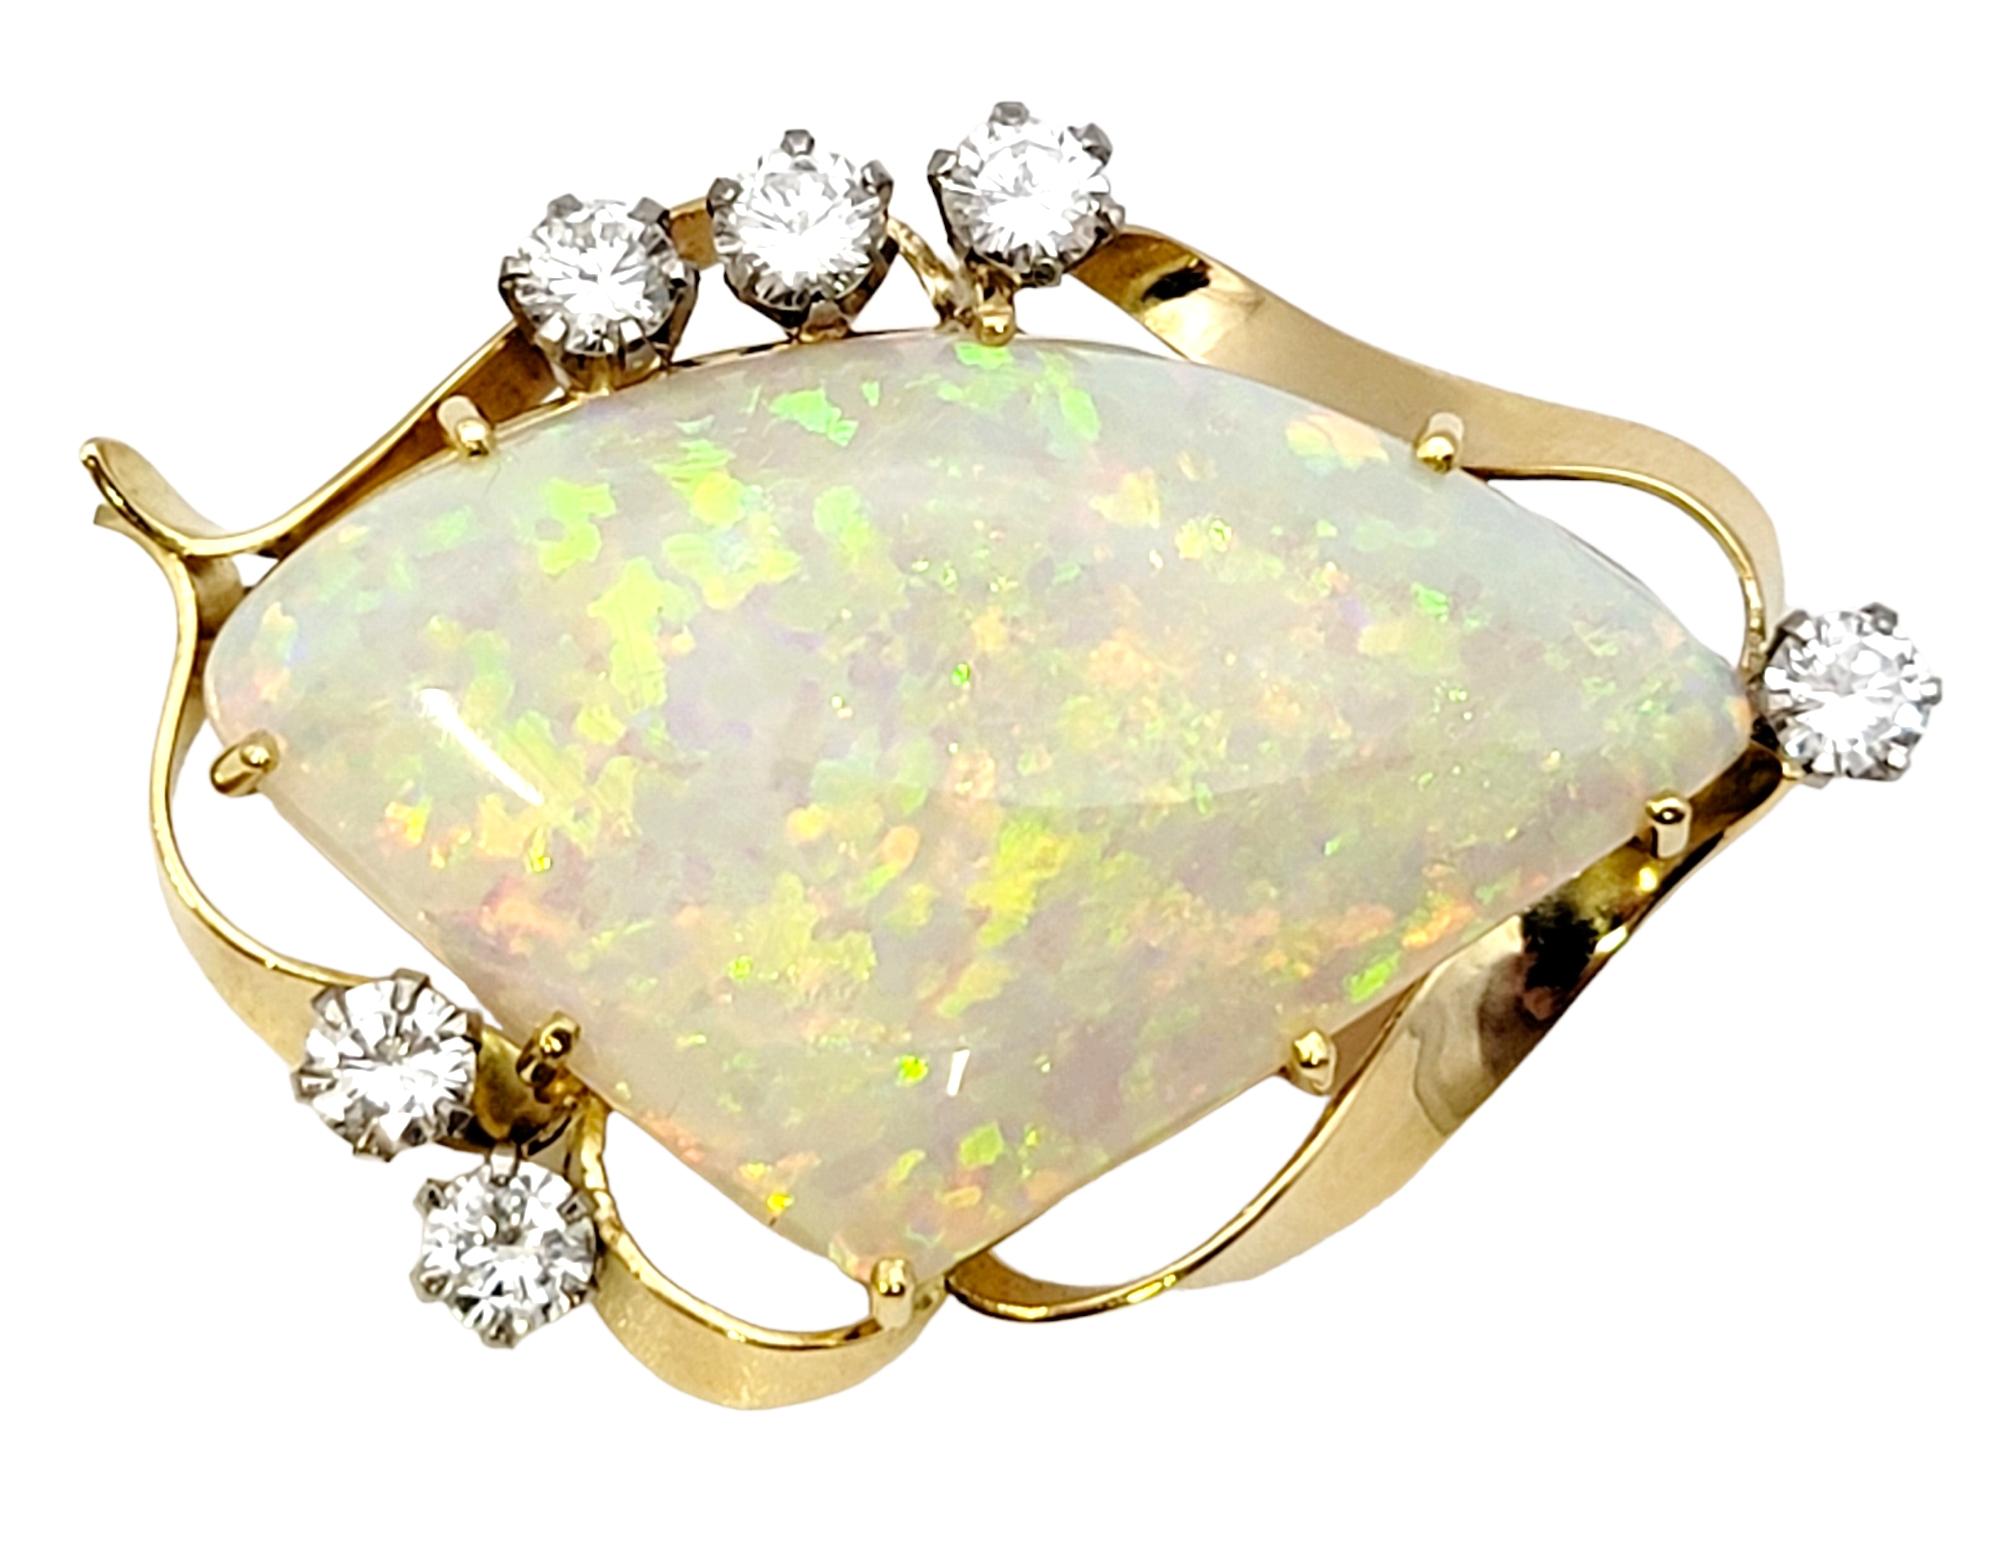 This exquisite opal and diamond brooch absolutely glows. The radiant cabochon opal stone has an incredible play of color, shimmering from every angle with its iridescent beauty. The stone is prong set in polished yellow gold and arranged in a